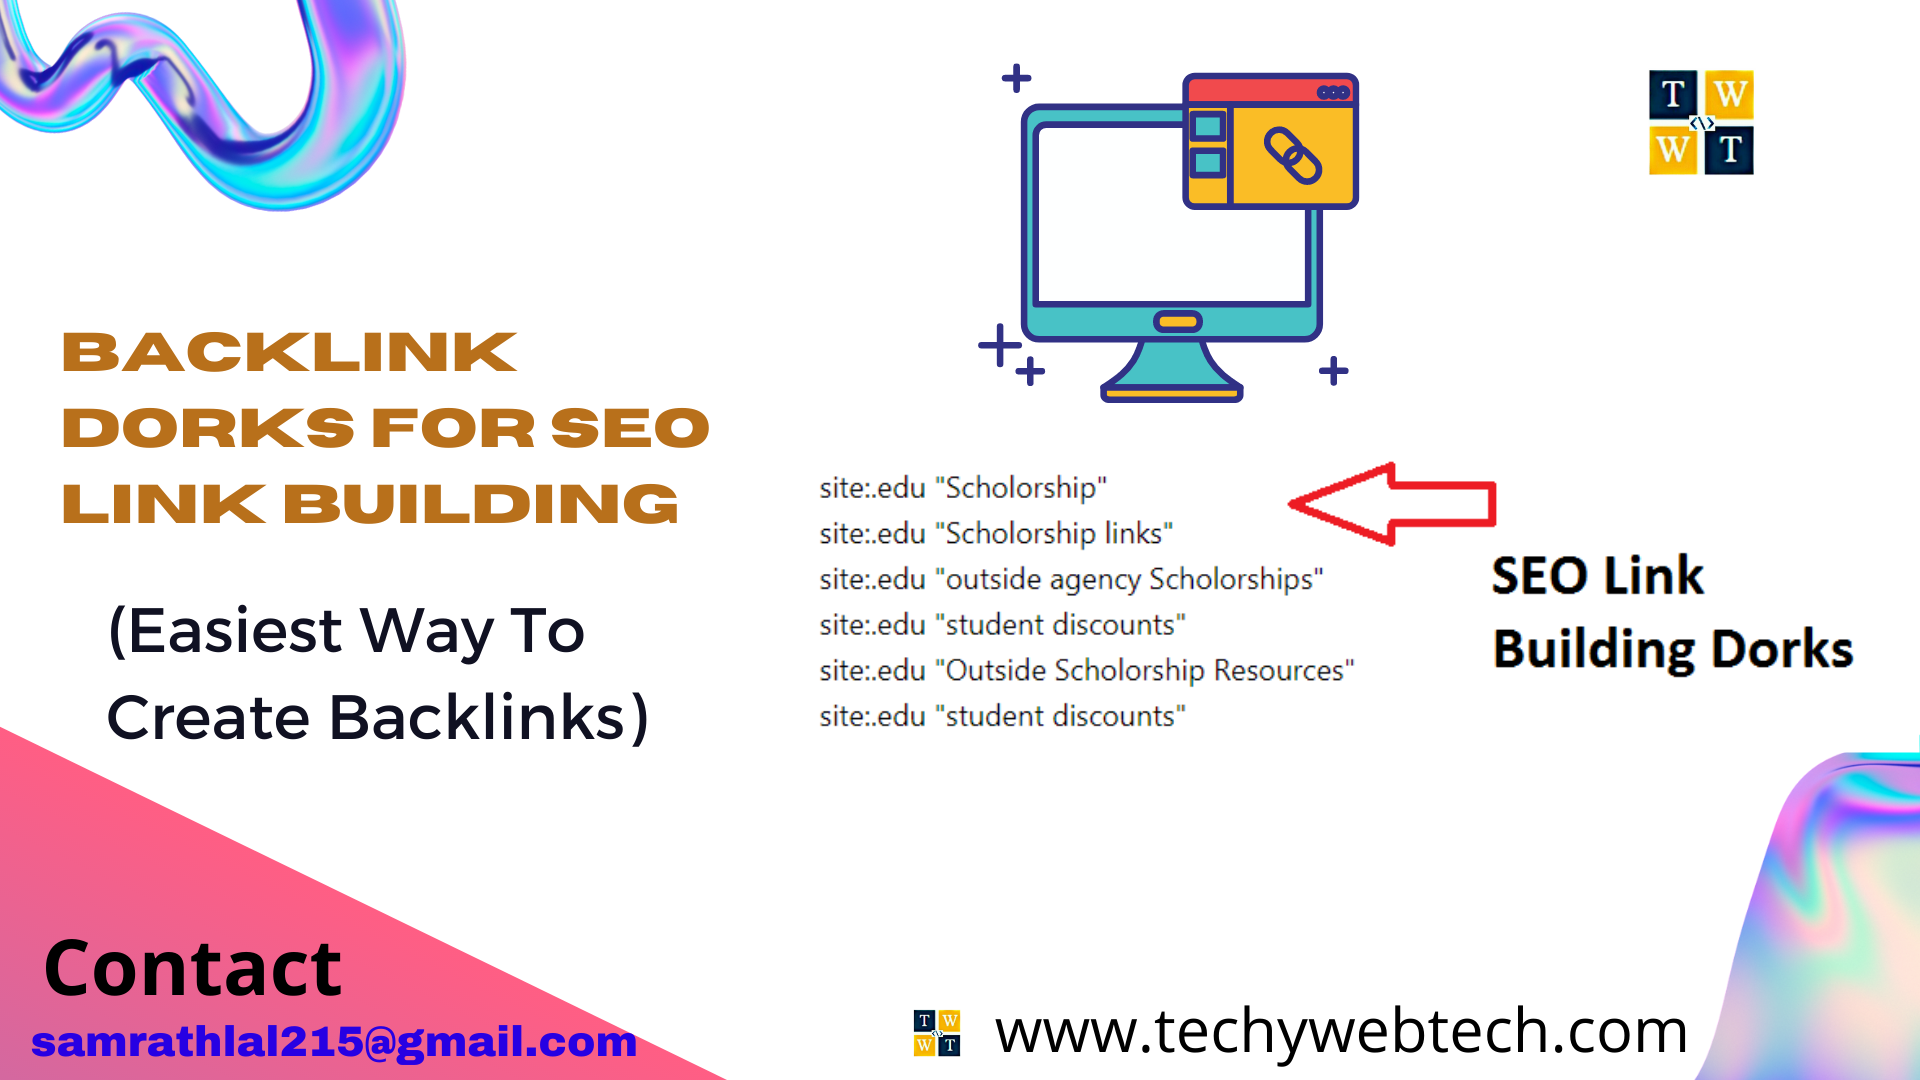 Google Dorks for SEO Link Building: How to Get More Links to Your Site